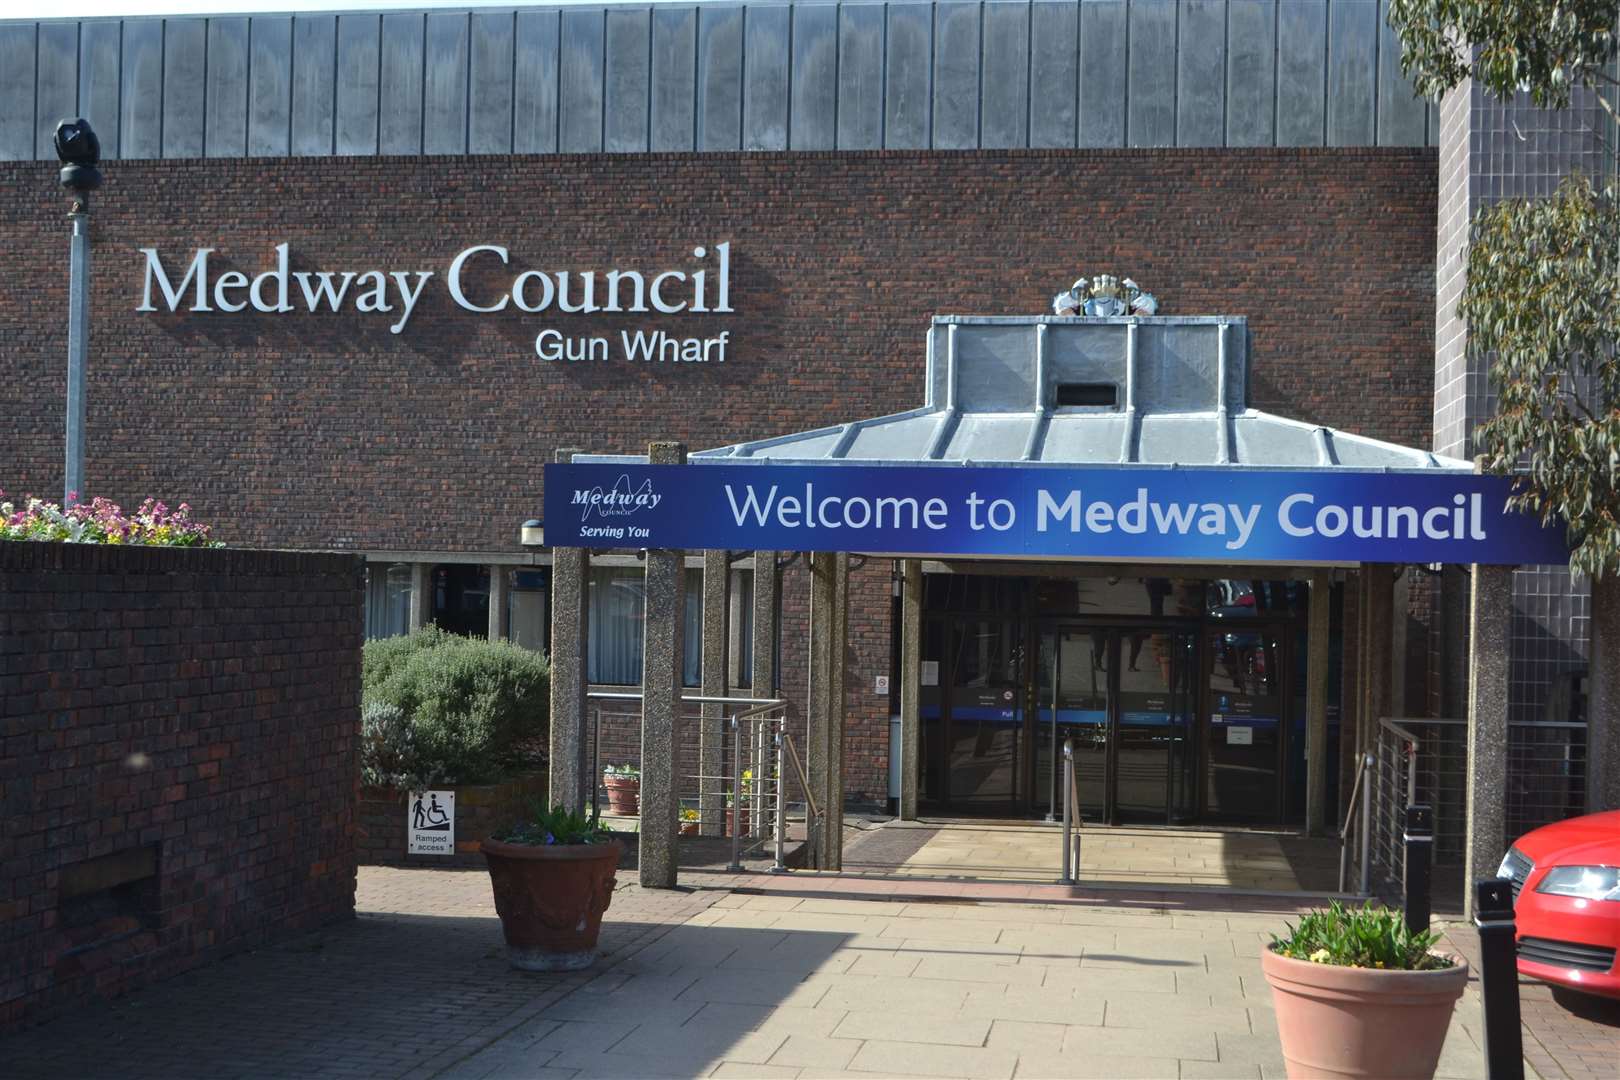 Medway Council issued a statement to residents and motorists